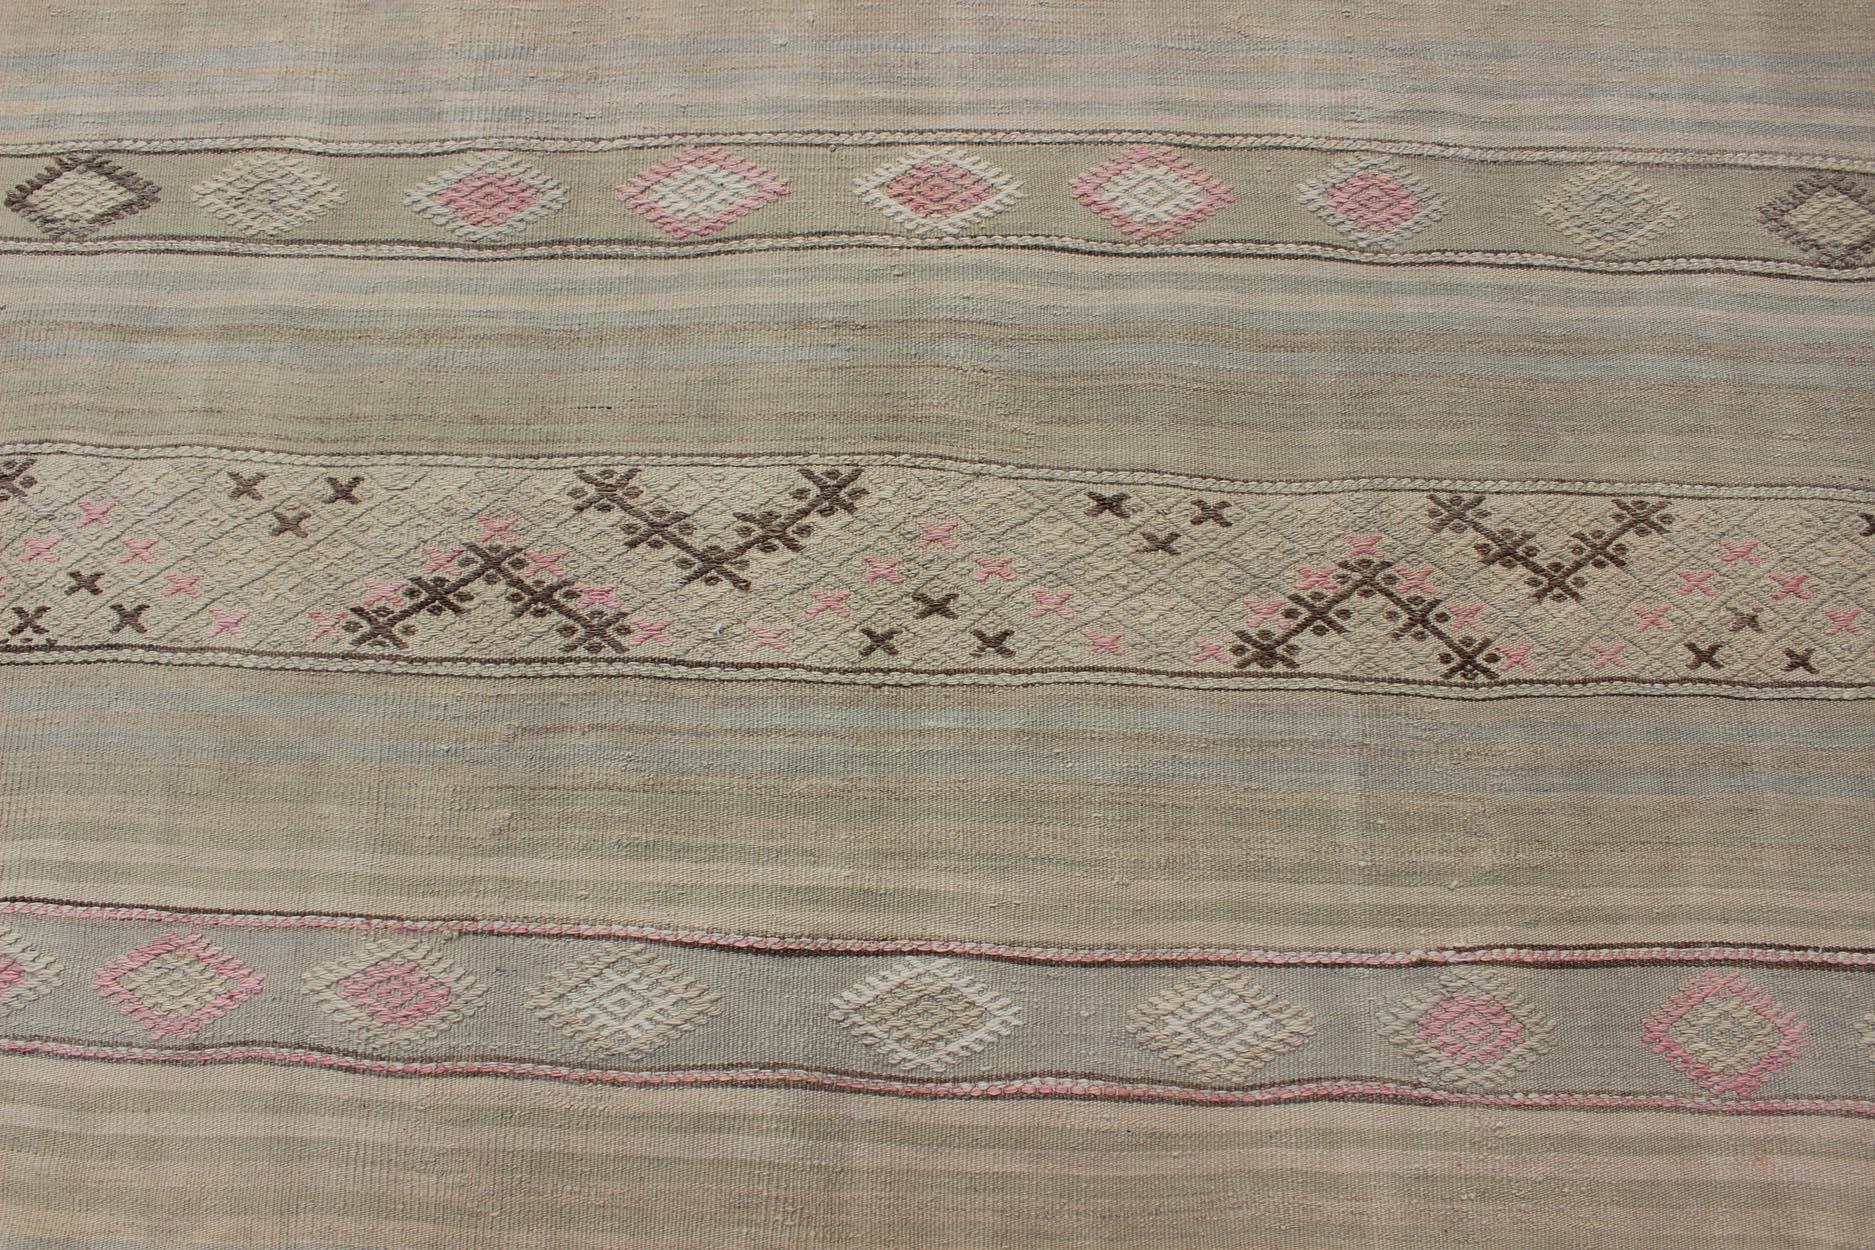 Vintage Turkish Flat-Weave Striped Kilim in Taupe, Pink, and Light Brown For Sale 2